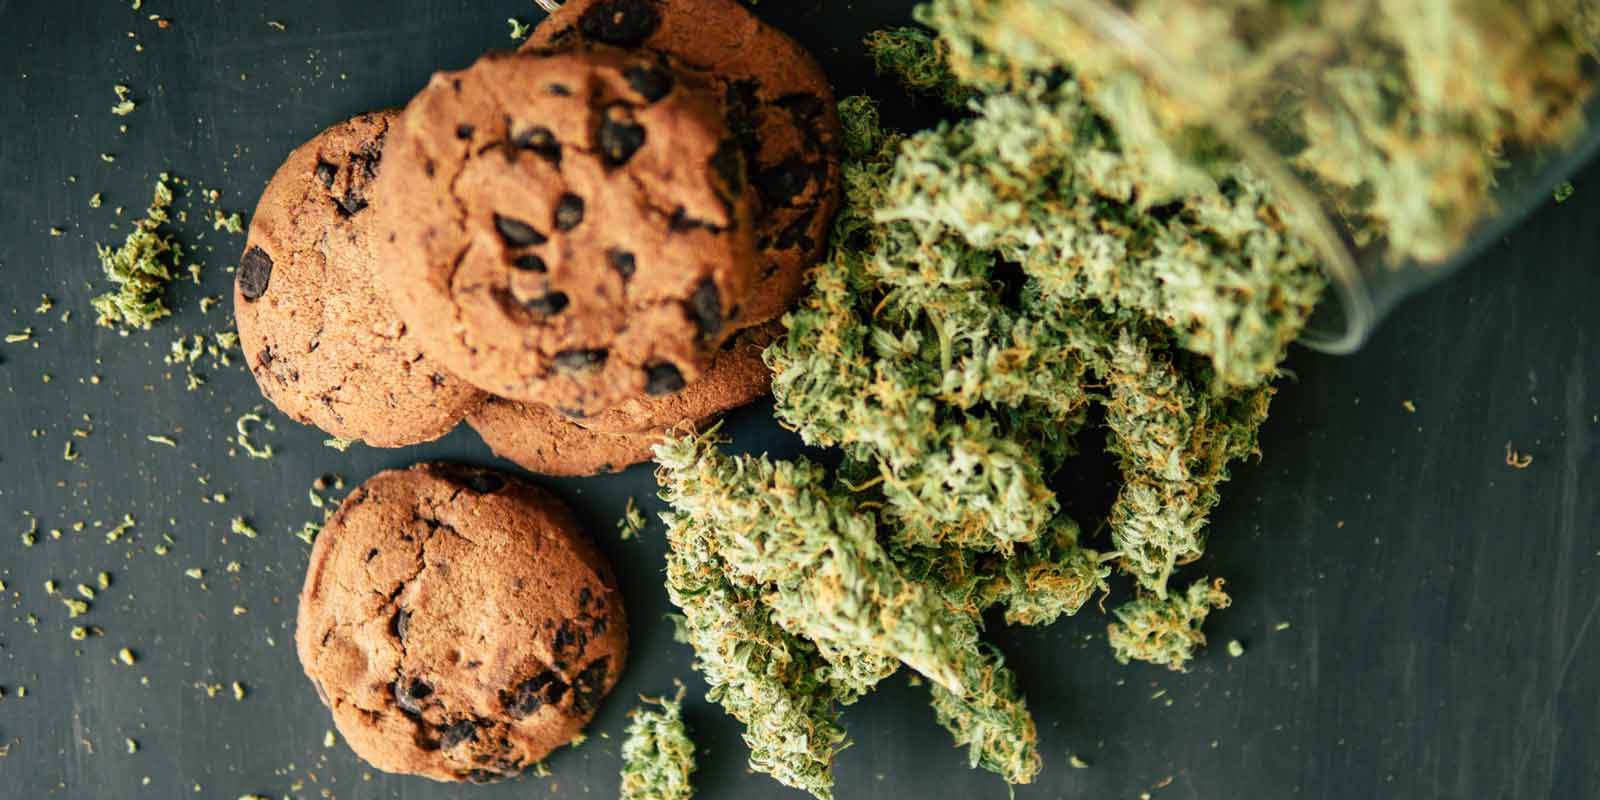 Edibles reportedly lands man in hospital – siblings tell all on Trini TikTok